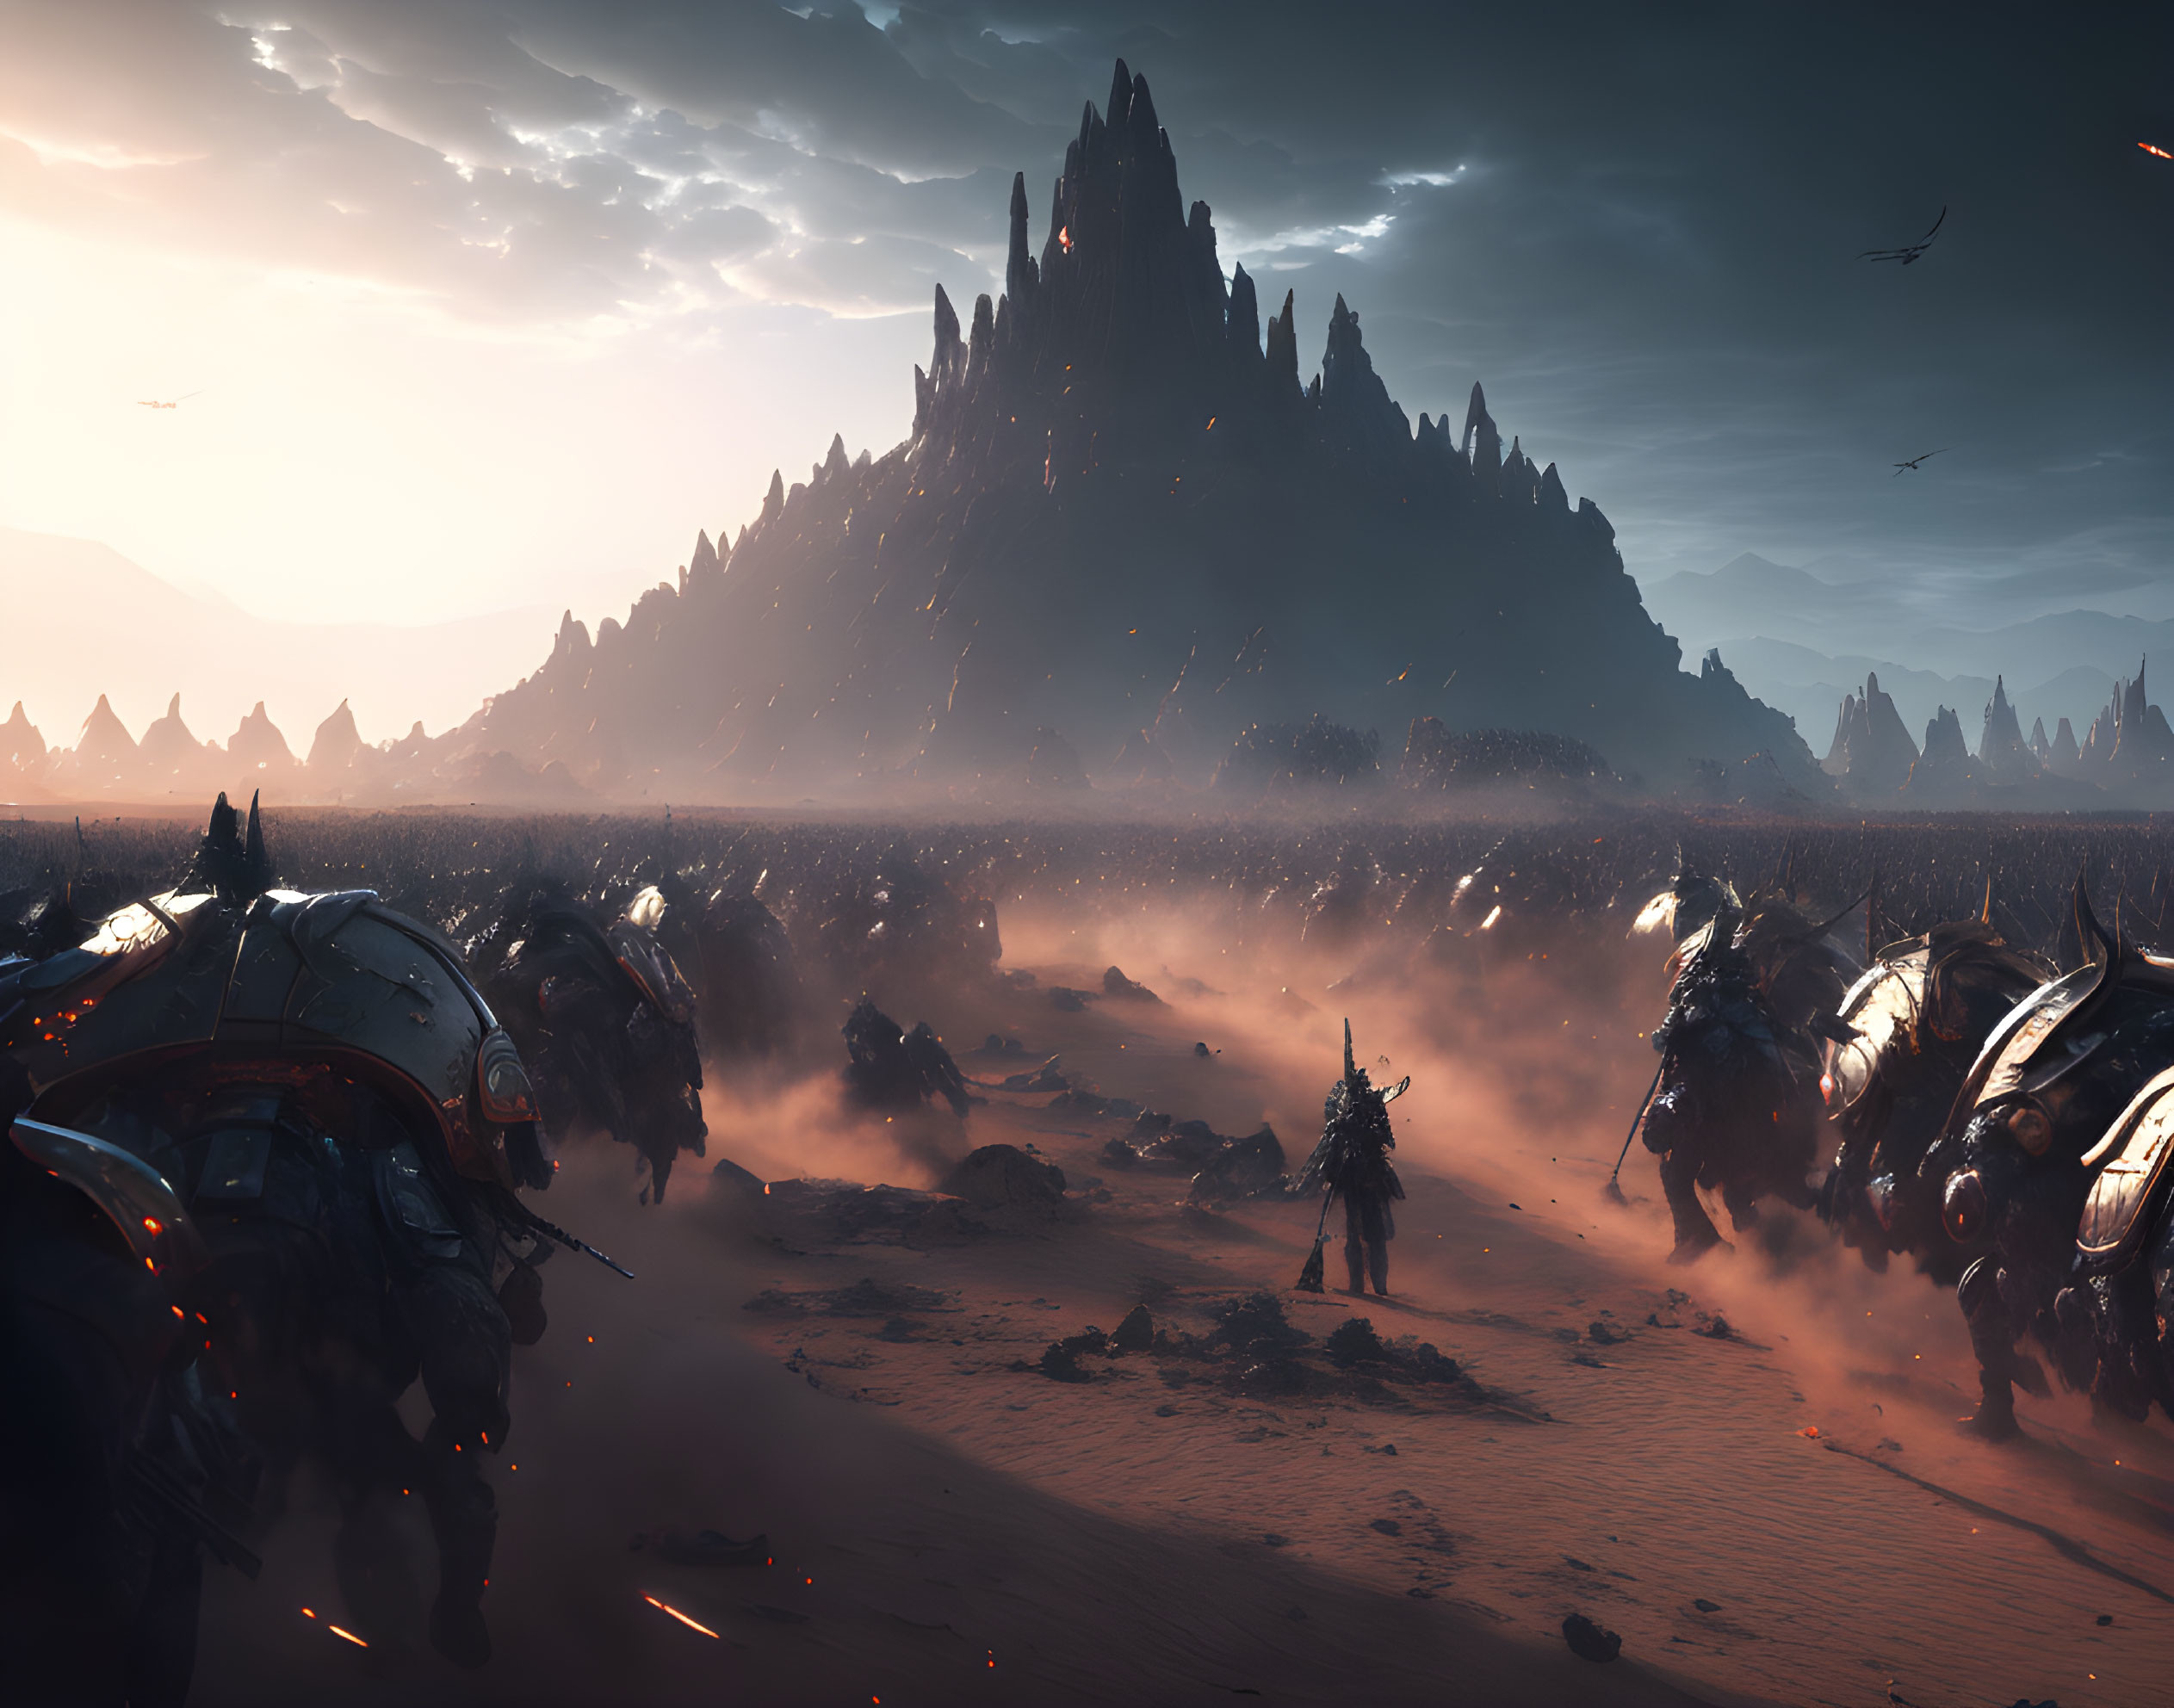 Warriors, beetle-like creatures, and mountain spire in vast landscape